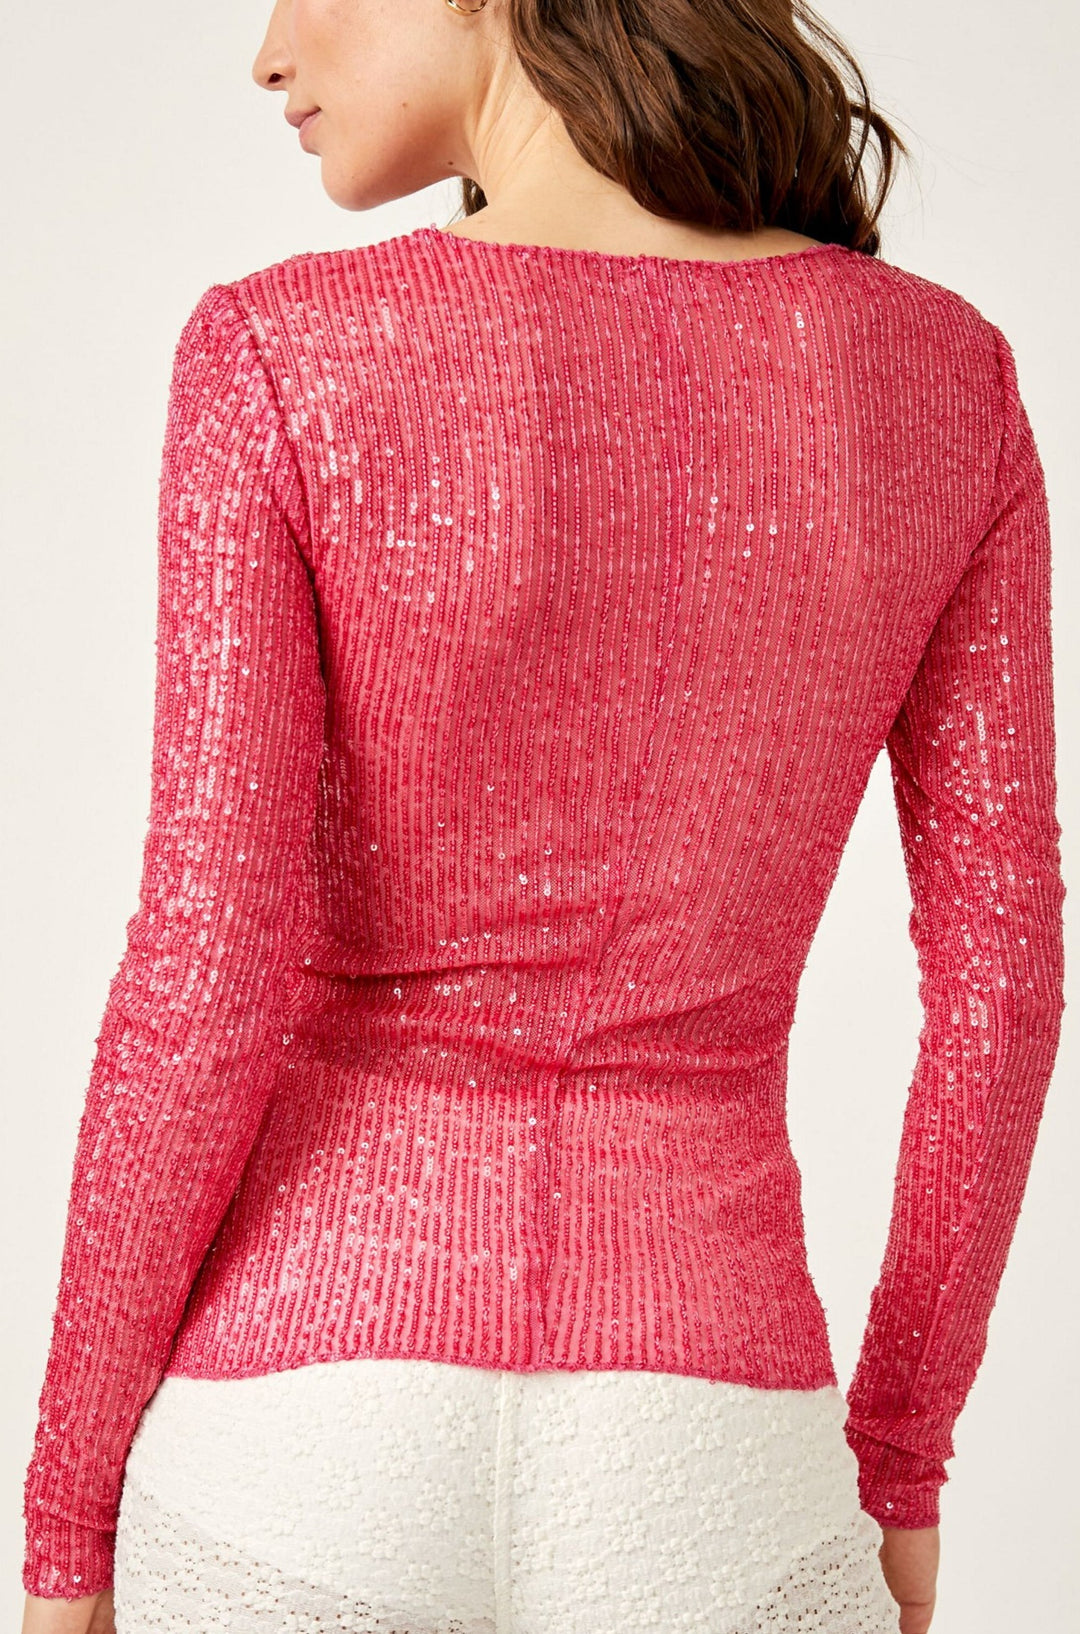 GOLD RUSH LONG SLEEVE (PINK COMBO) - FREE PEOPLE